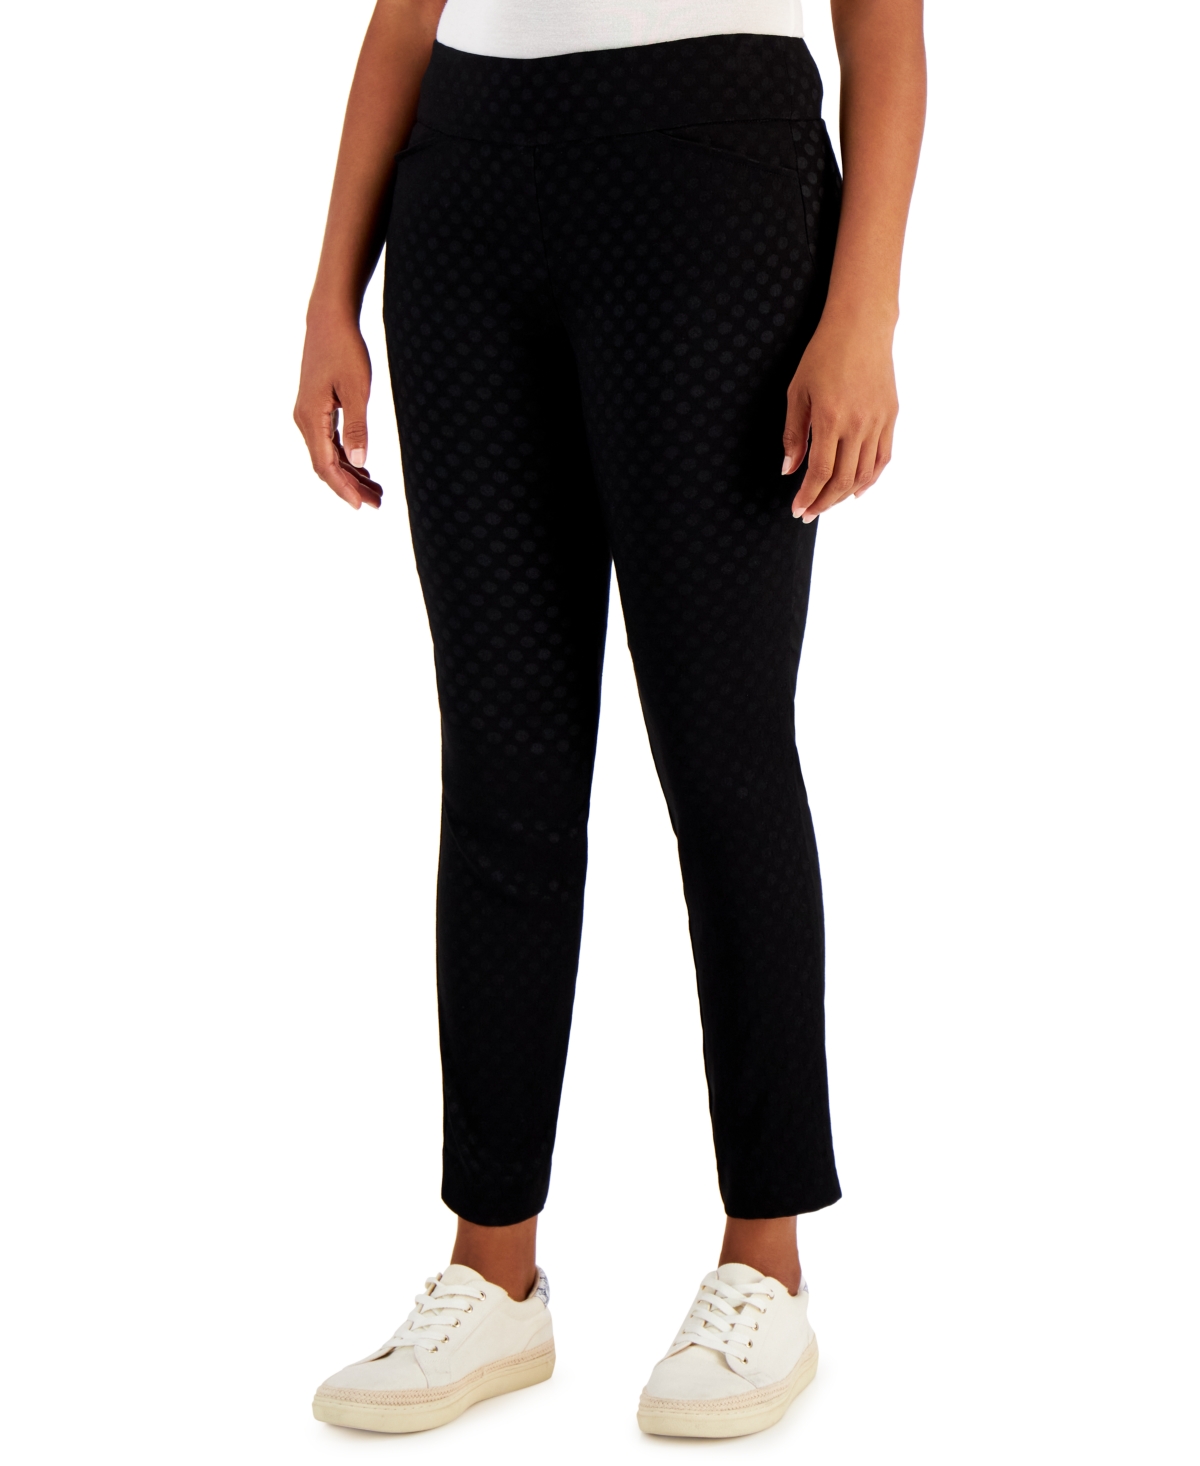 Charter Club Women's Embossed Dot Pull-On Skinny Pants, Created for Macy's